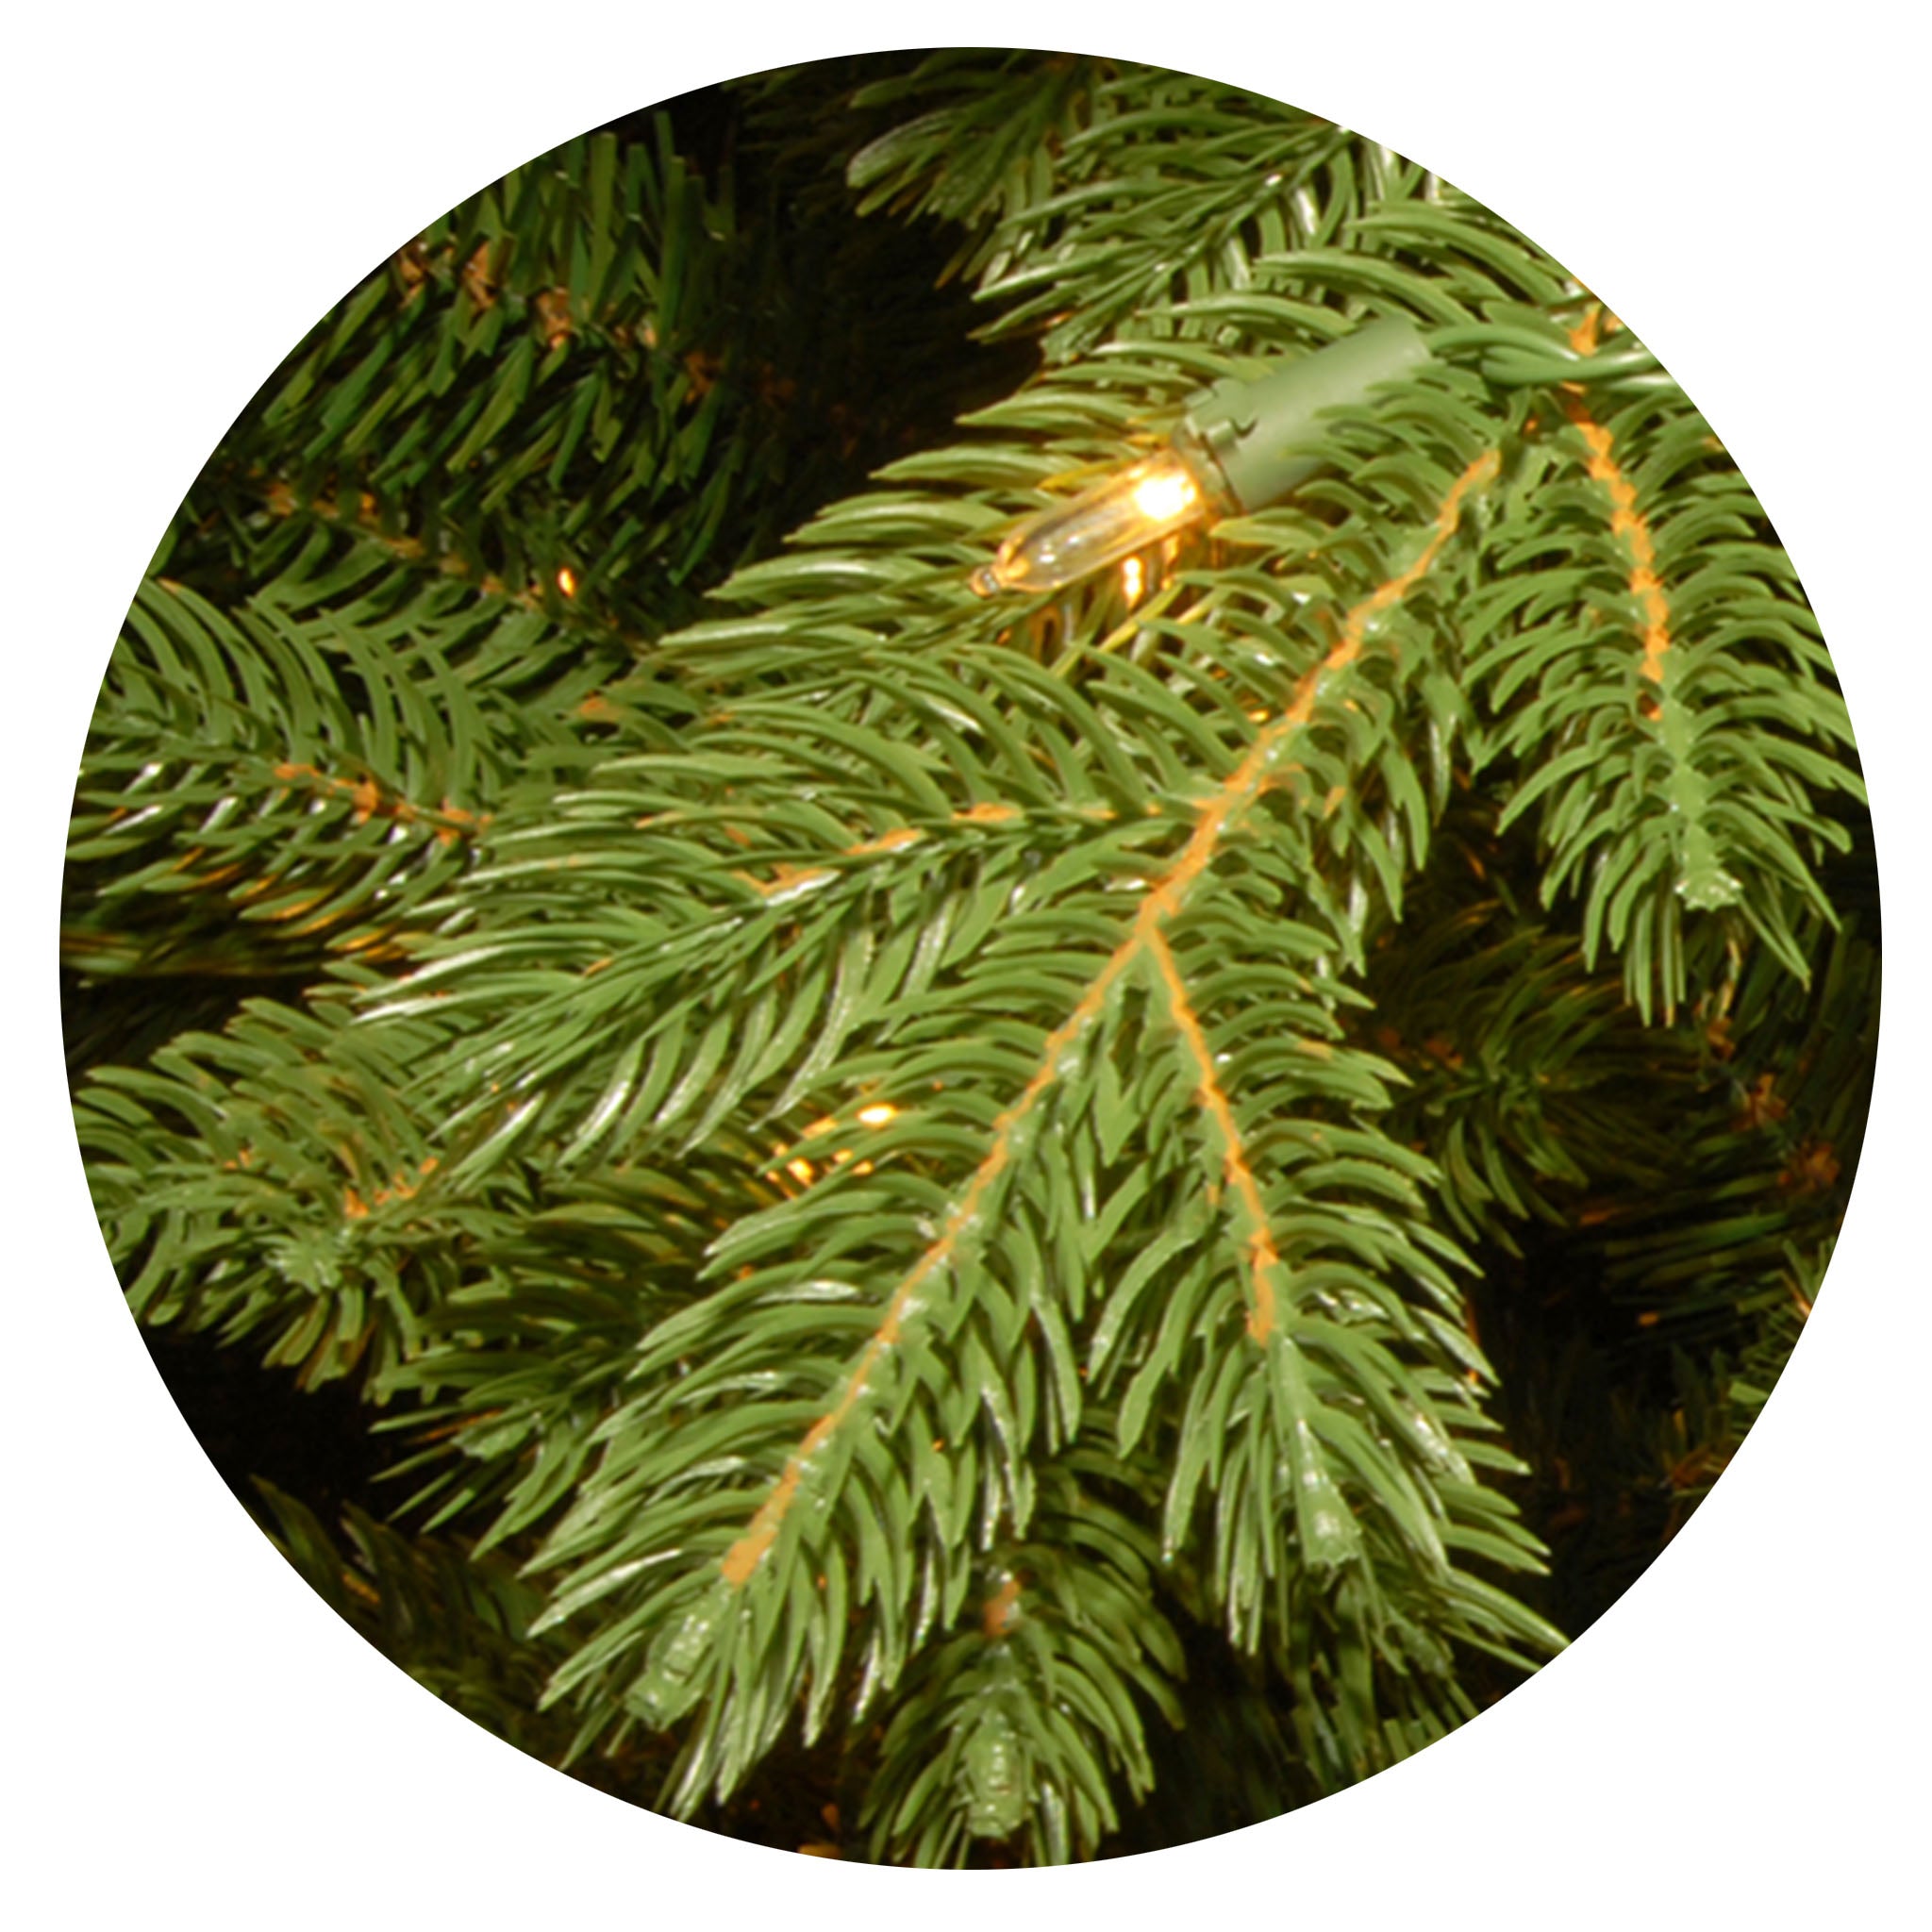 Pre-Lit 'Feel Real' Artificial Full Downswept Christmas Tree, Green, Douglas Fir, Dual Color LED Lights, Includes Stand and PowerConnect, 7.5 feet